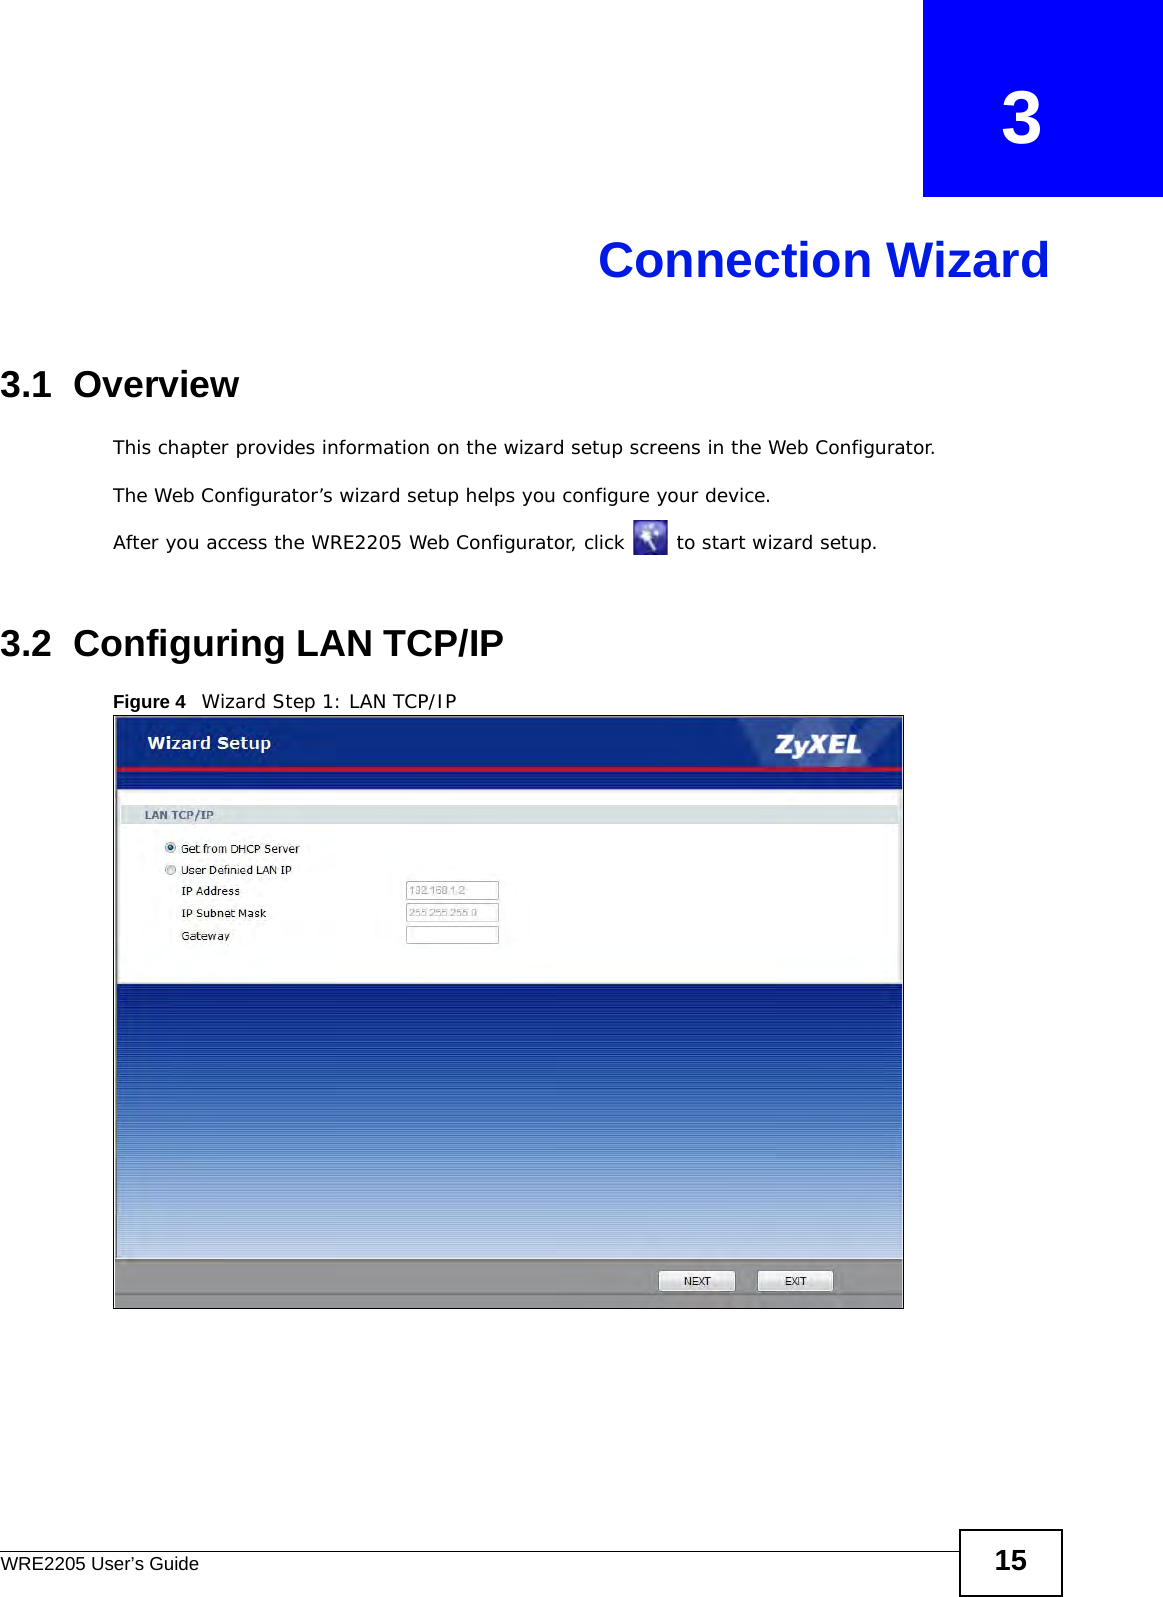 WRE2205 User’s Guide 15CHAPTER   3Connection Wizard3.1  OverviewThis chapter provides information on the wizard setup screens in the Web Configurator.The Web Configurator’s wizard setup helps you configure your device.After you access the WRE2205 Web Configurator, click   to start wizard setup.3.2  Configuring LAN TCP/IPFigure 4   Wizard Step 1: LAN TCP/IP